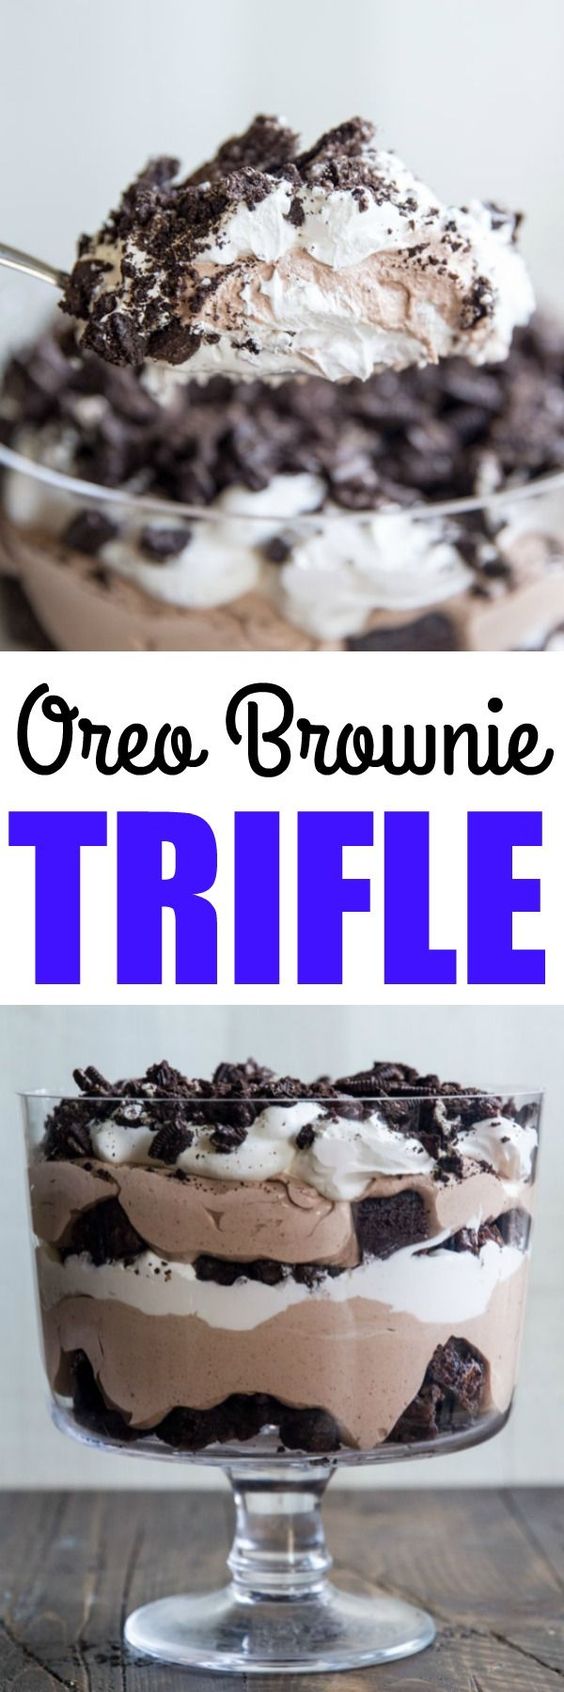 The ultimate chocolate dessert! Layers of brownie pieces, rich chocolate pudding, whipped topping, and crushed Oreos. Swoon! via @culinaryhill